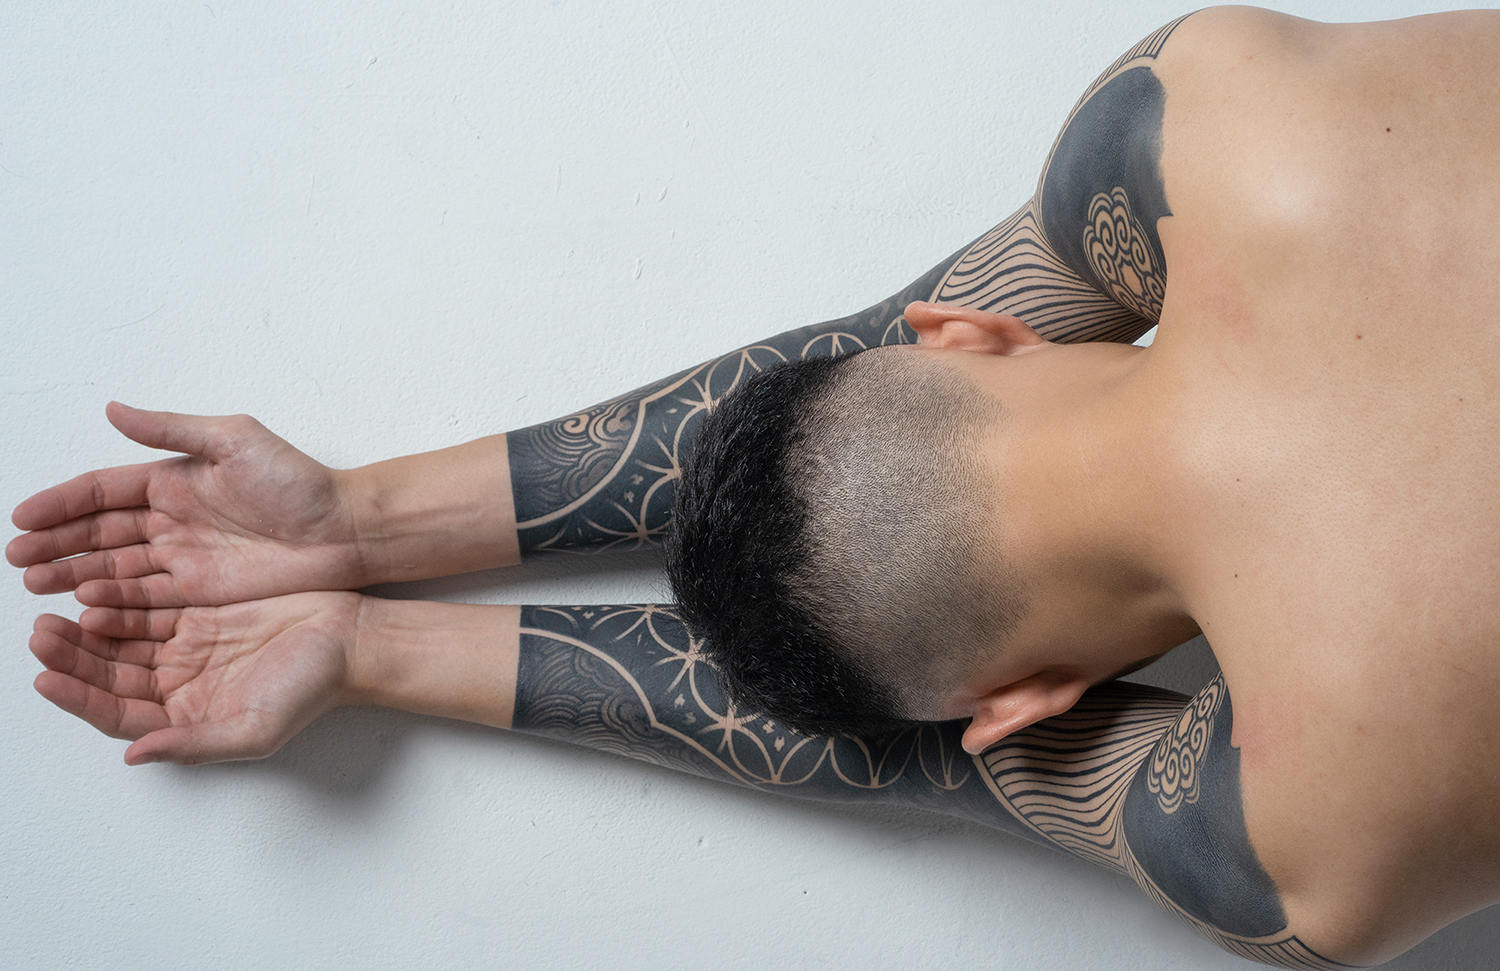 The power and sacredness of tattoo art